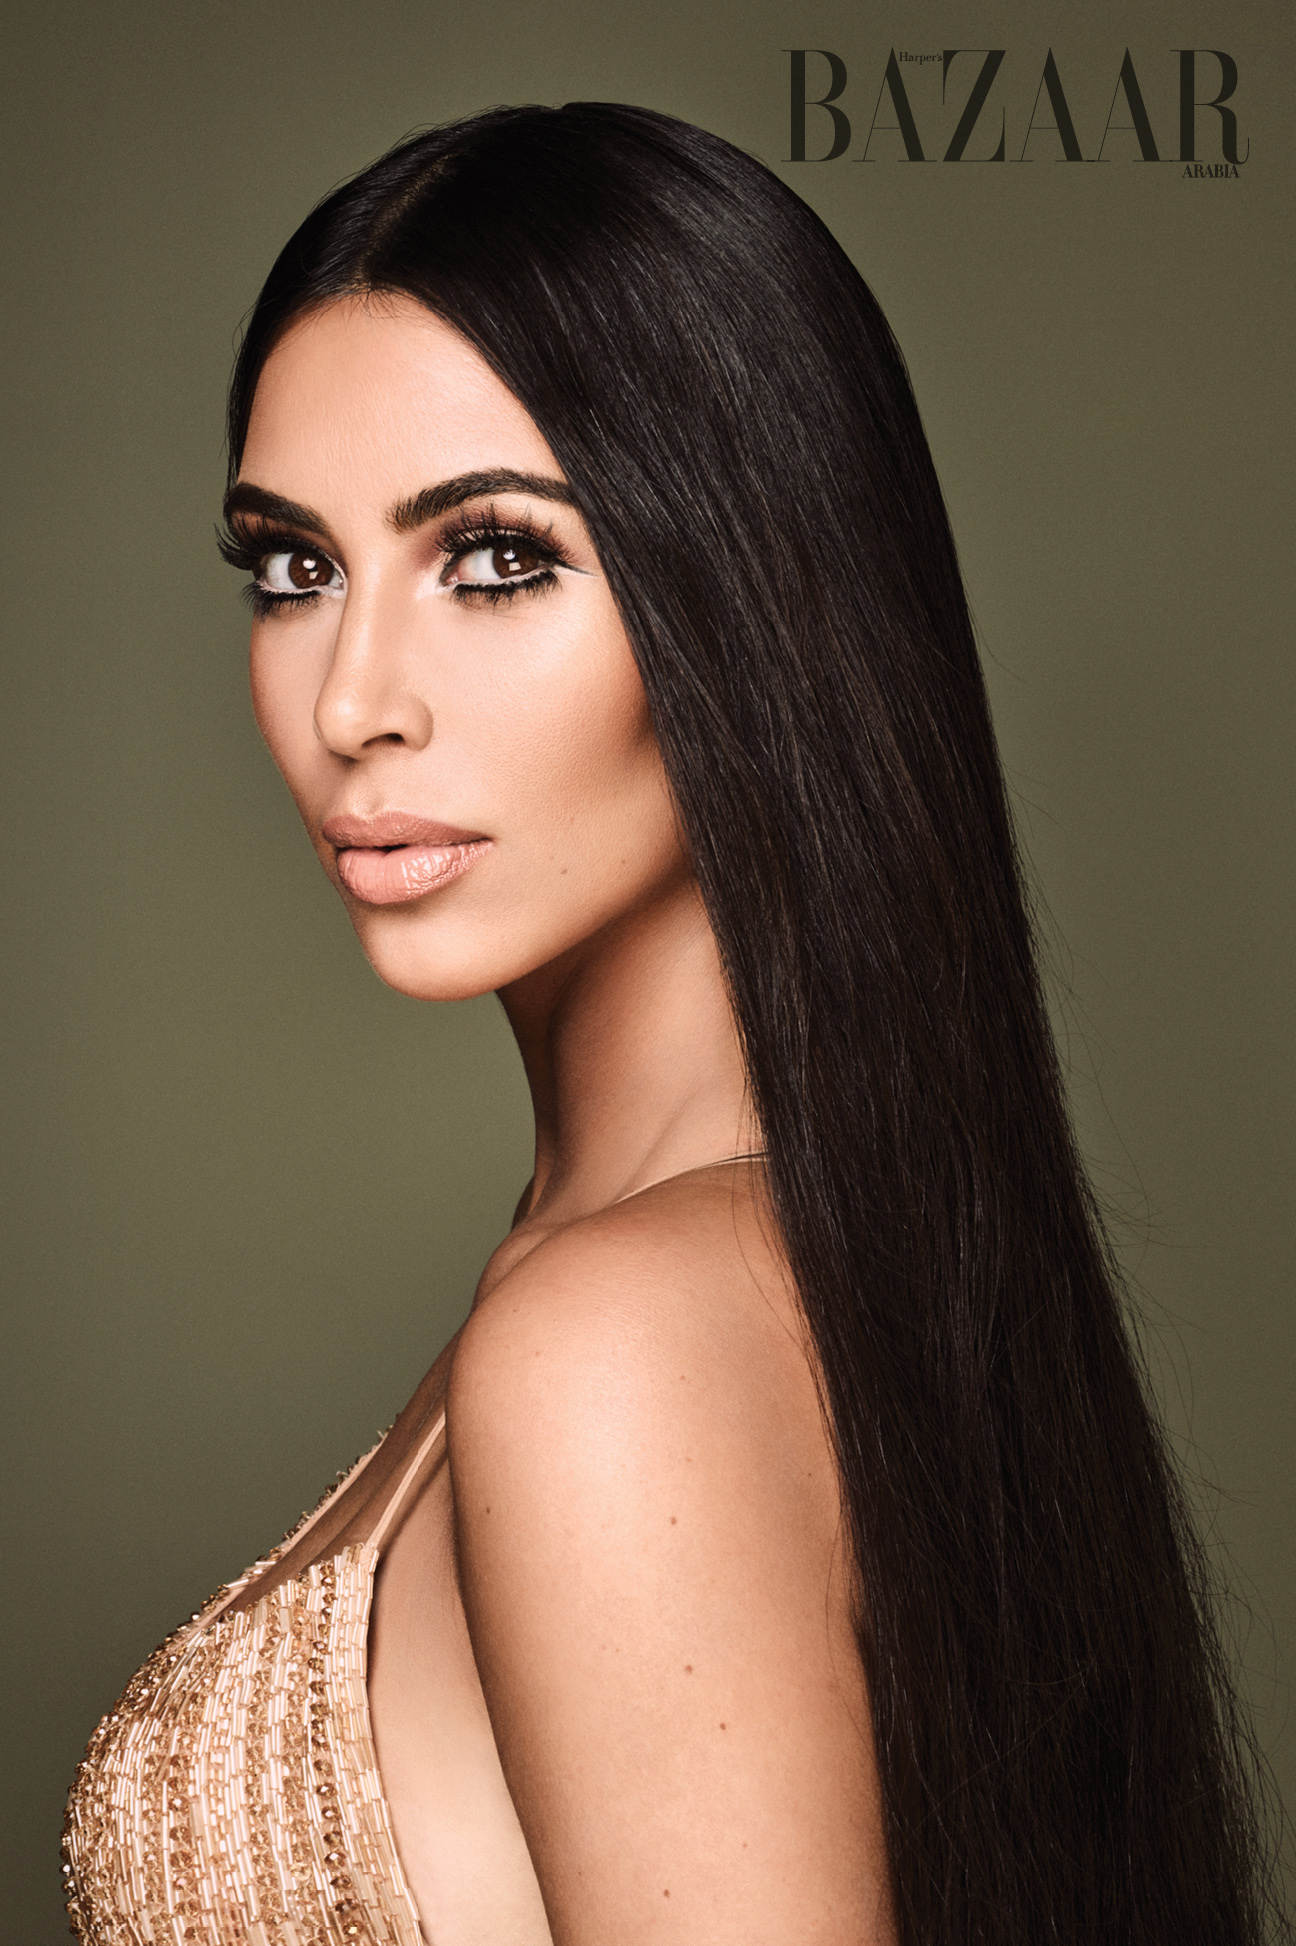 Kim Kardashian Inspired By Cher For Latest Cover Shoot Fashion News Conversations About Her 